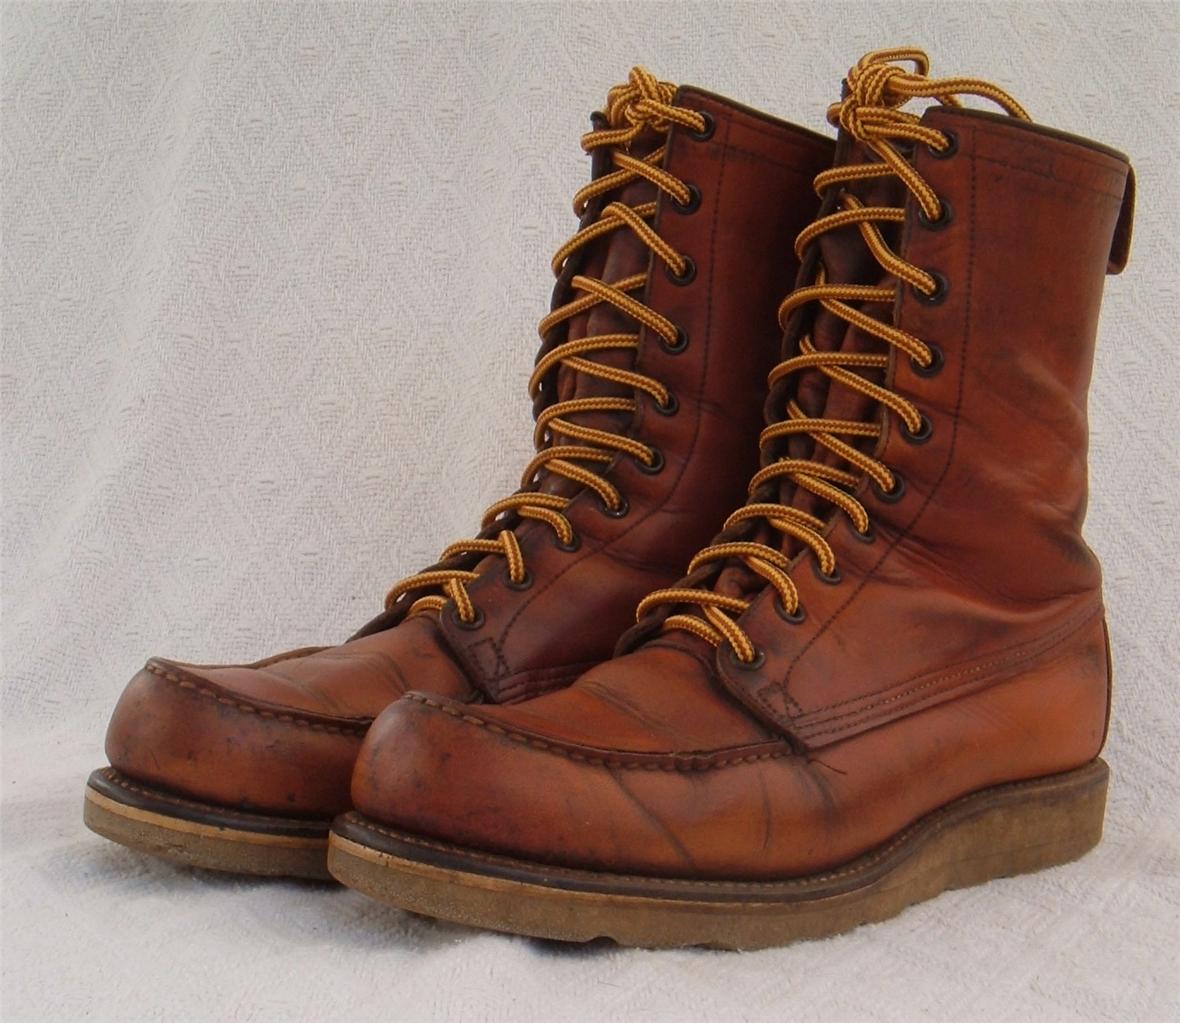 Vintage 50's/60's RED WING 